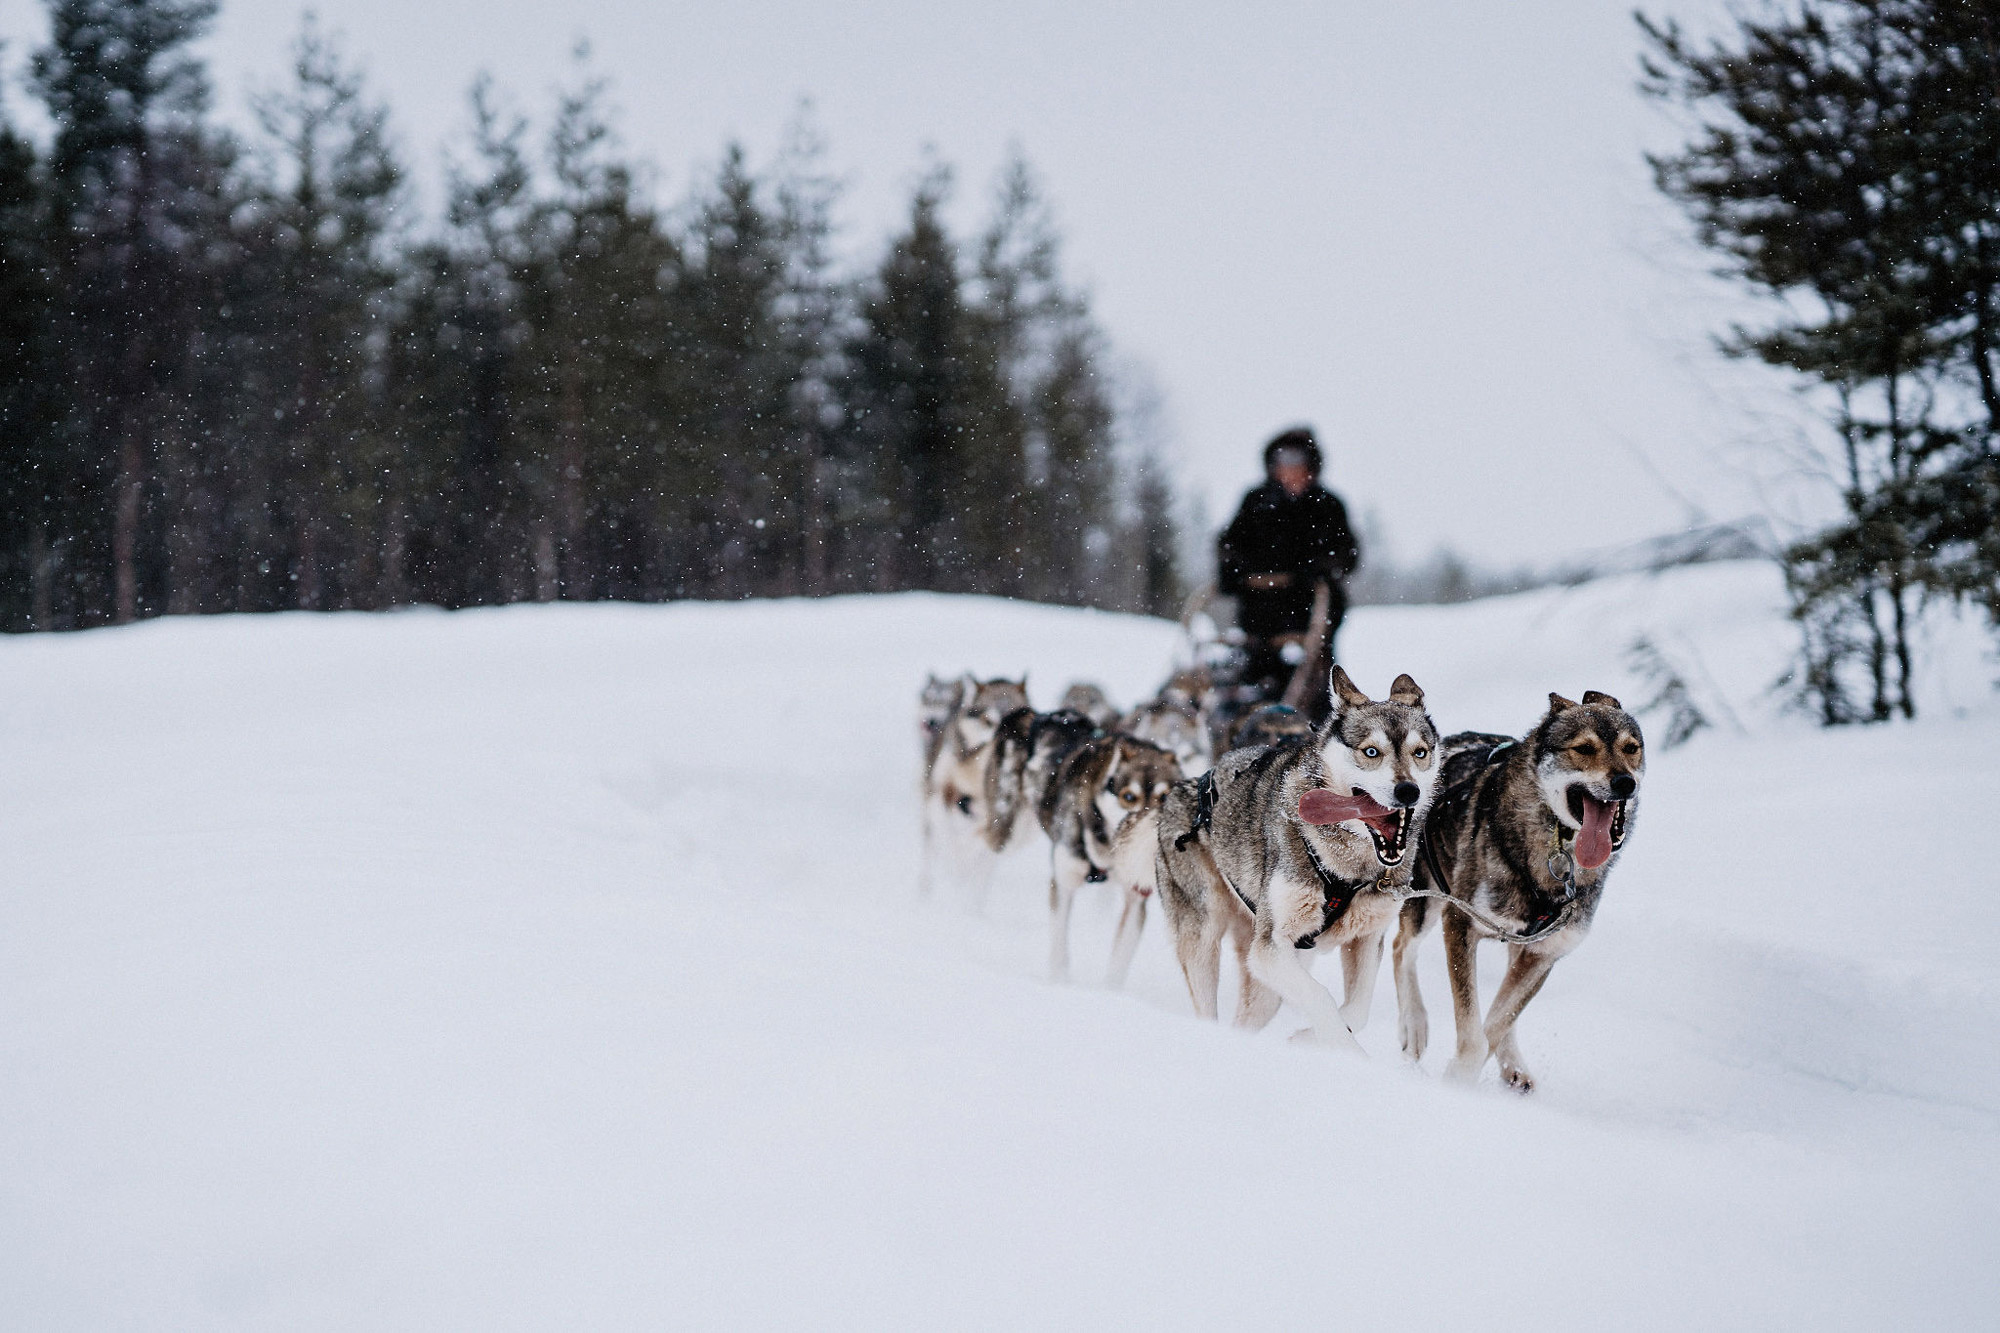 Sled dogs and a musher on their way through the snow